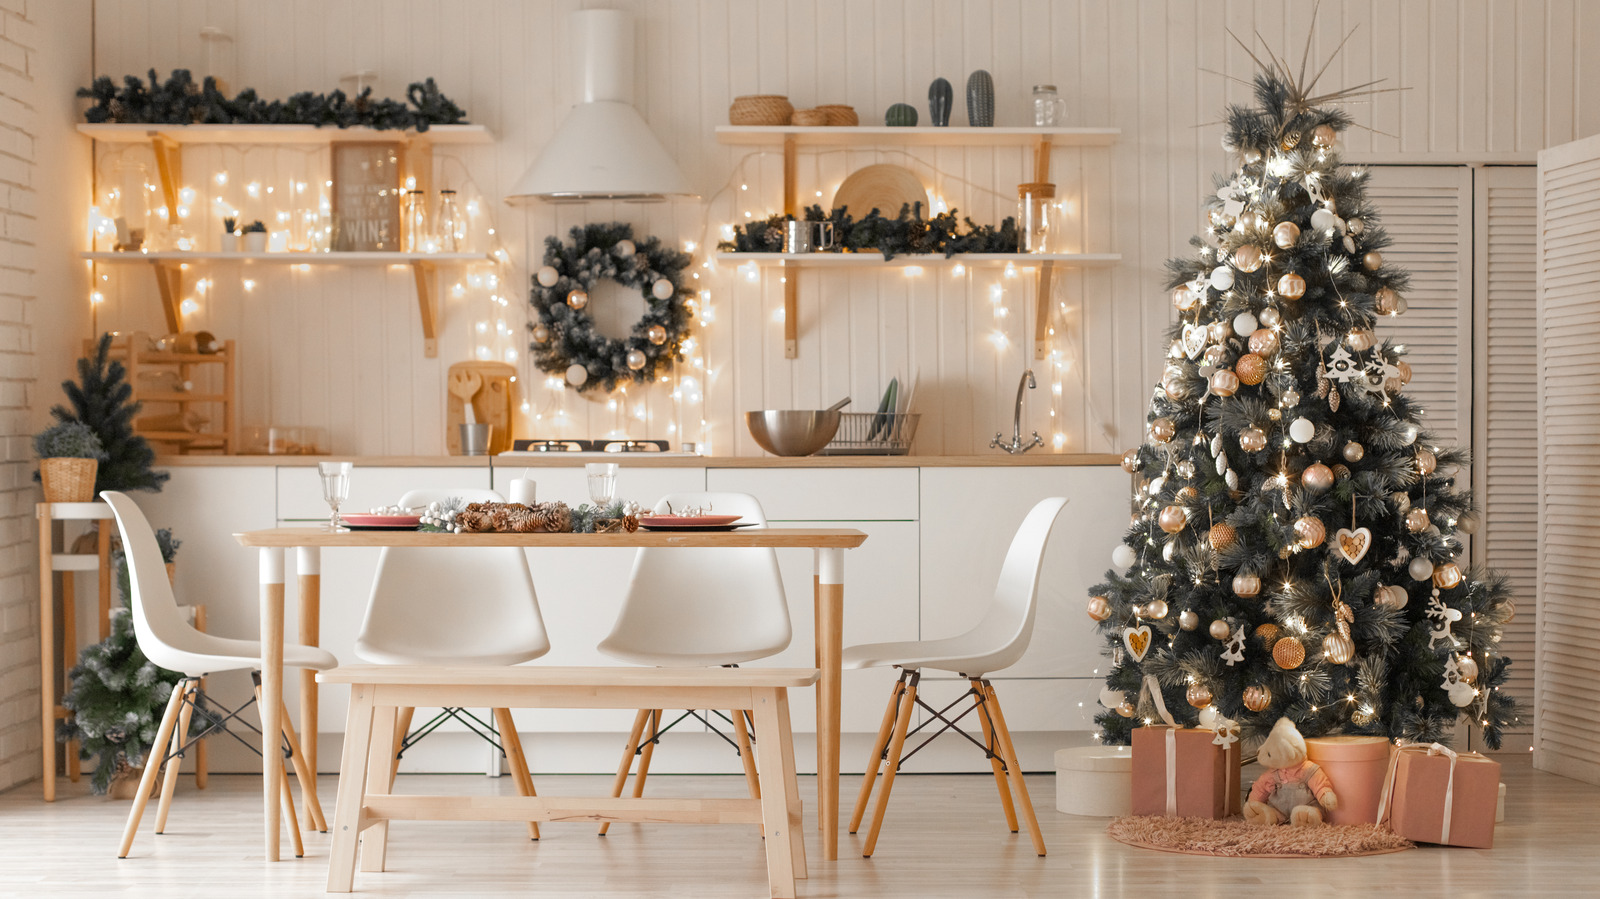 Bring Christmas Into Your Kitchen With This DIY Cabinet Decoration